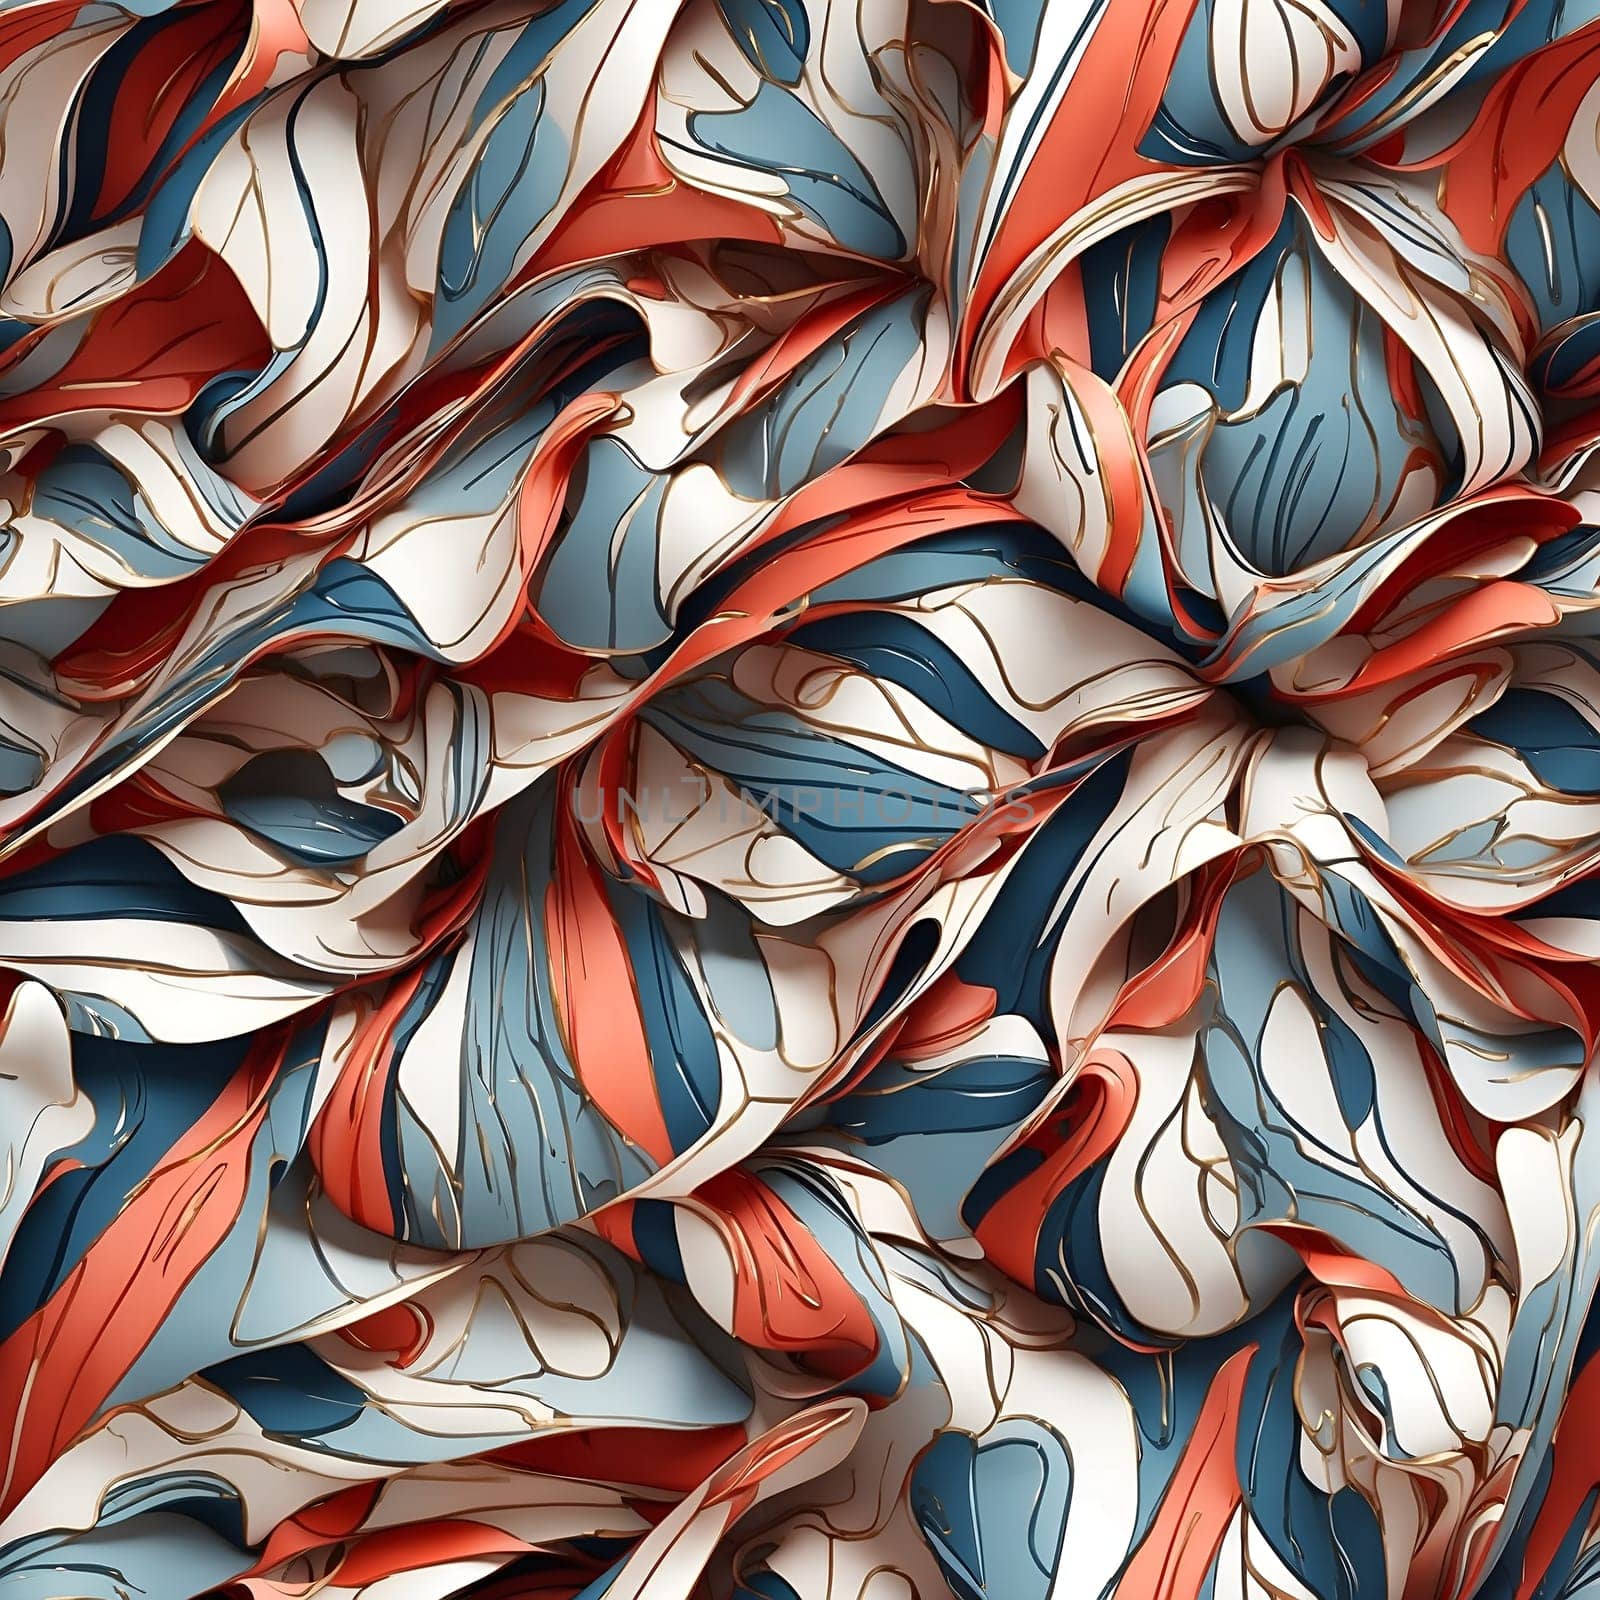 A detailed view of a seamless patterned fabric featuring intricate red, white, and blue designs.